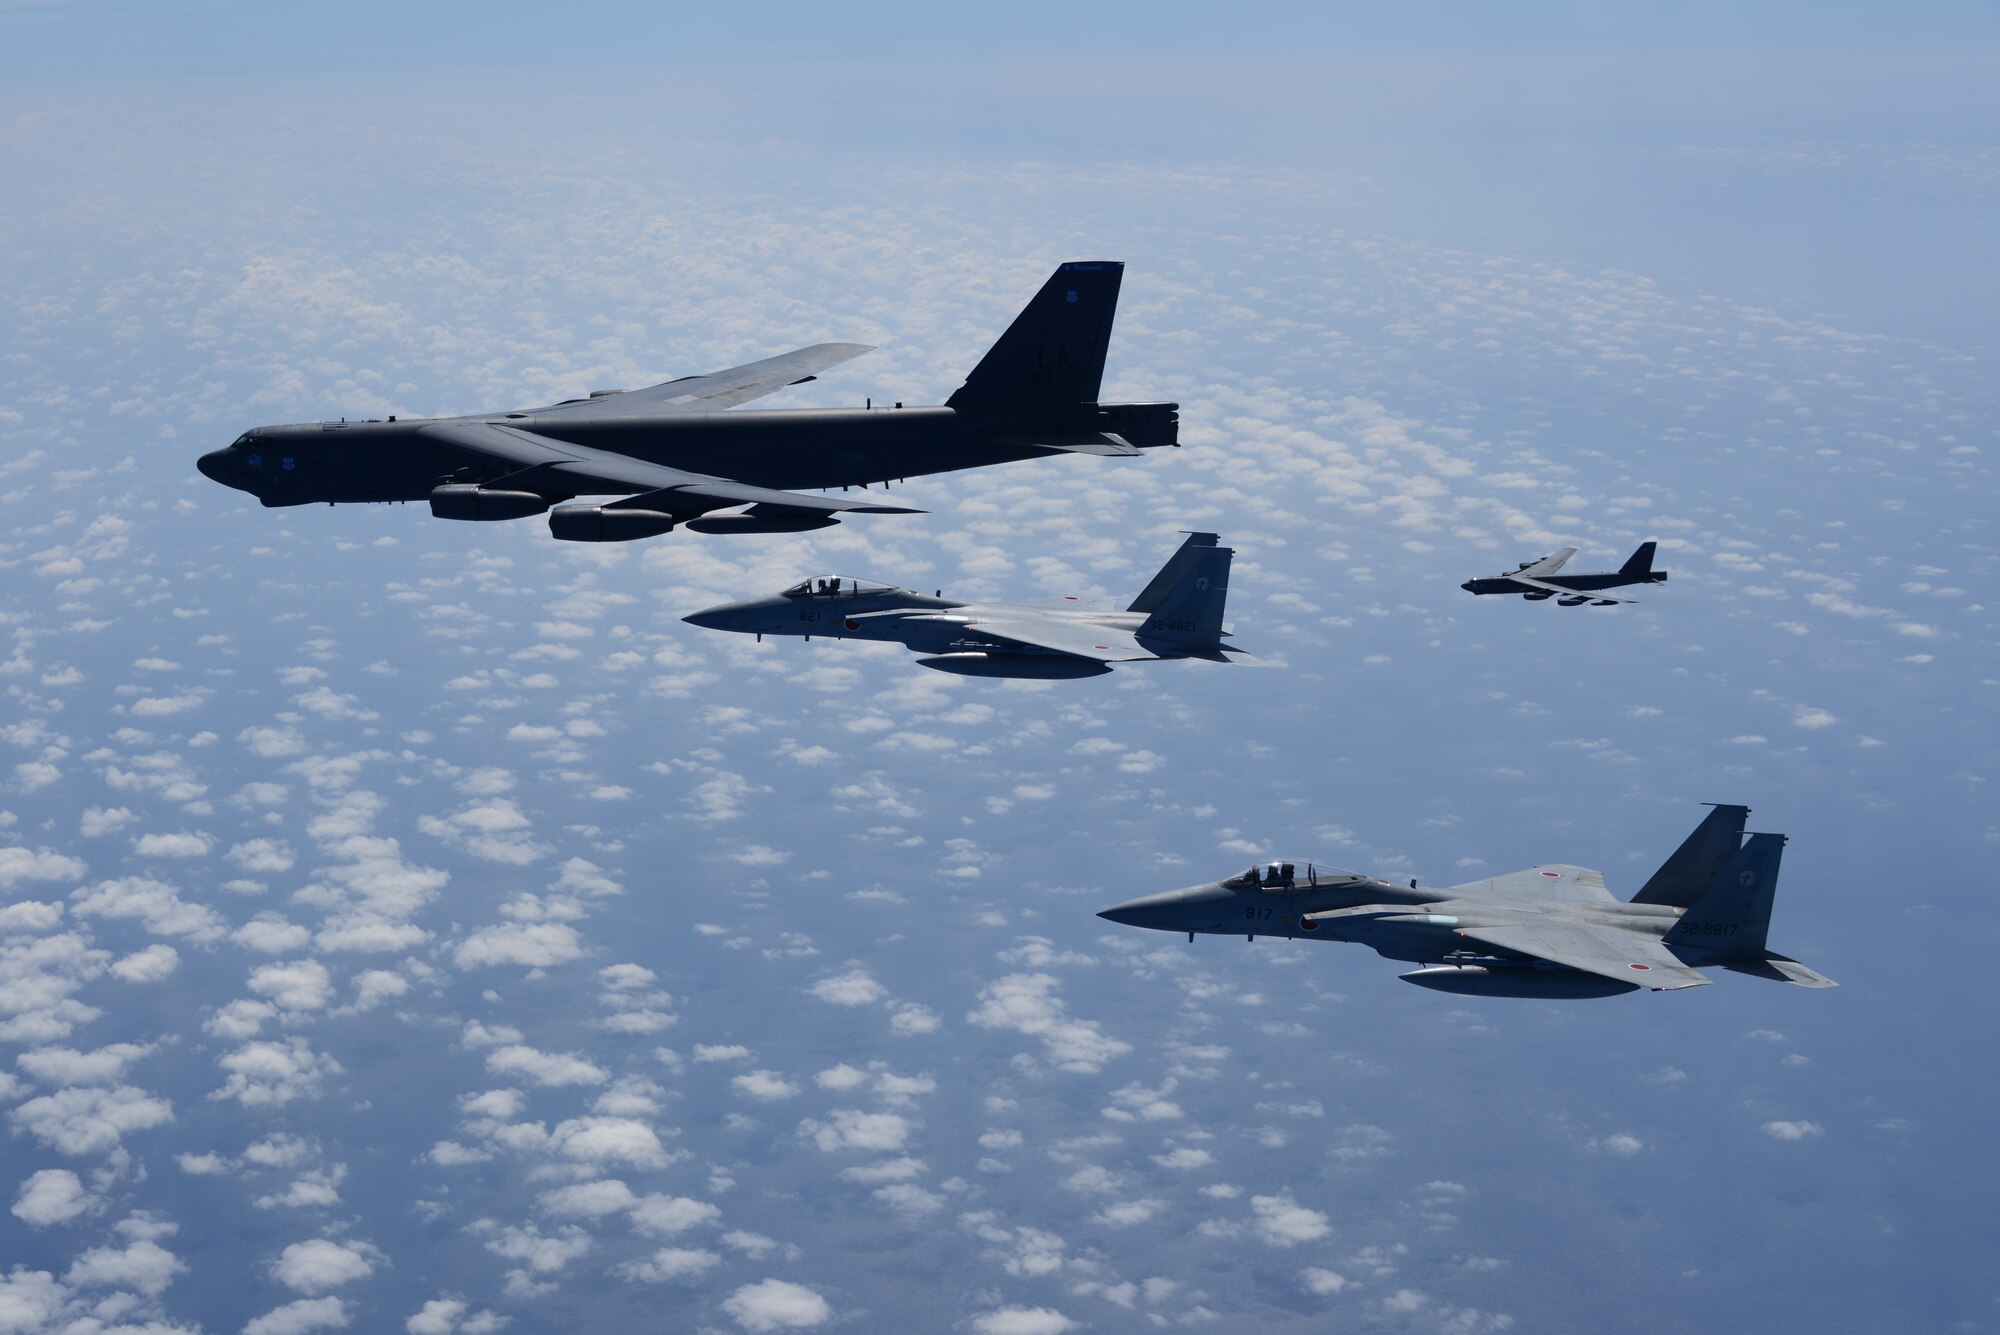 Two U.S. Air Force B-52H Stratofortress bombers and two Koku Jieitai (Japan Air Self-Defense Force) F-15 fighters execute a routine bilateral training mission in the vicinity of Japan, July 26, 2018.  This mission was flown in support of U.S. Indo-Pacific Command’s Continuous Bomber Presence (CBP) operations, which are a key component to improving combined and joint service interoperability. Bilateral training missions such as this allow the two countries to improve upon combined capabilities, tactical skills, and relationships. (Courtesy Photo)